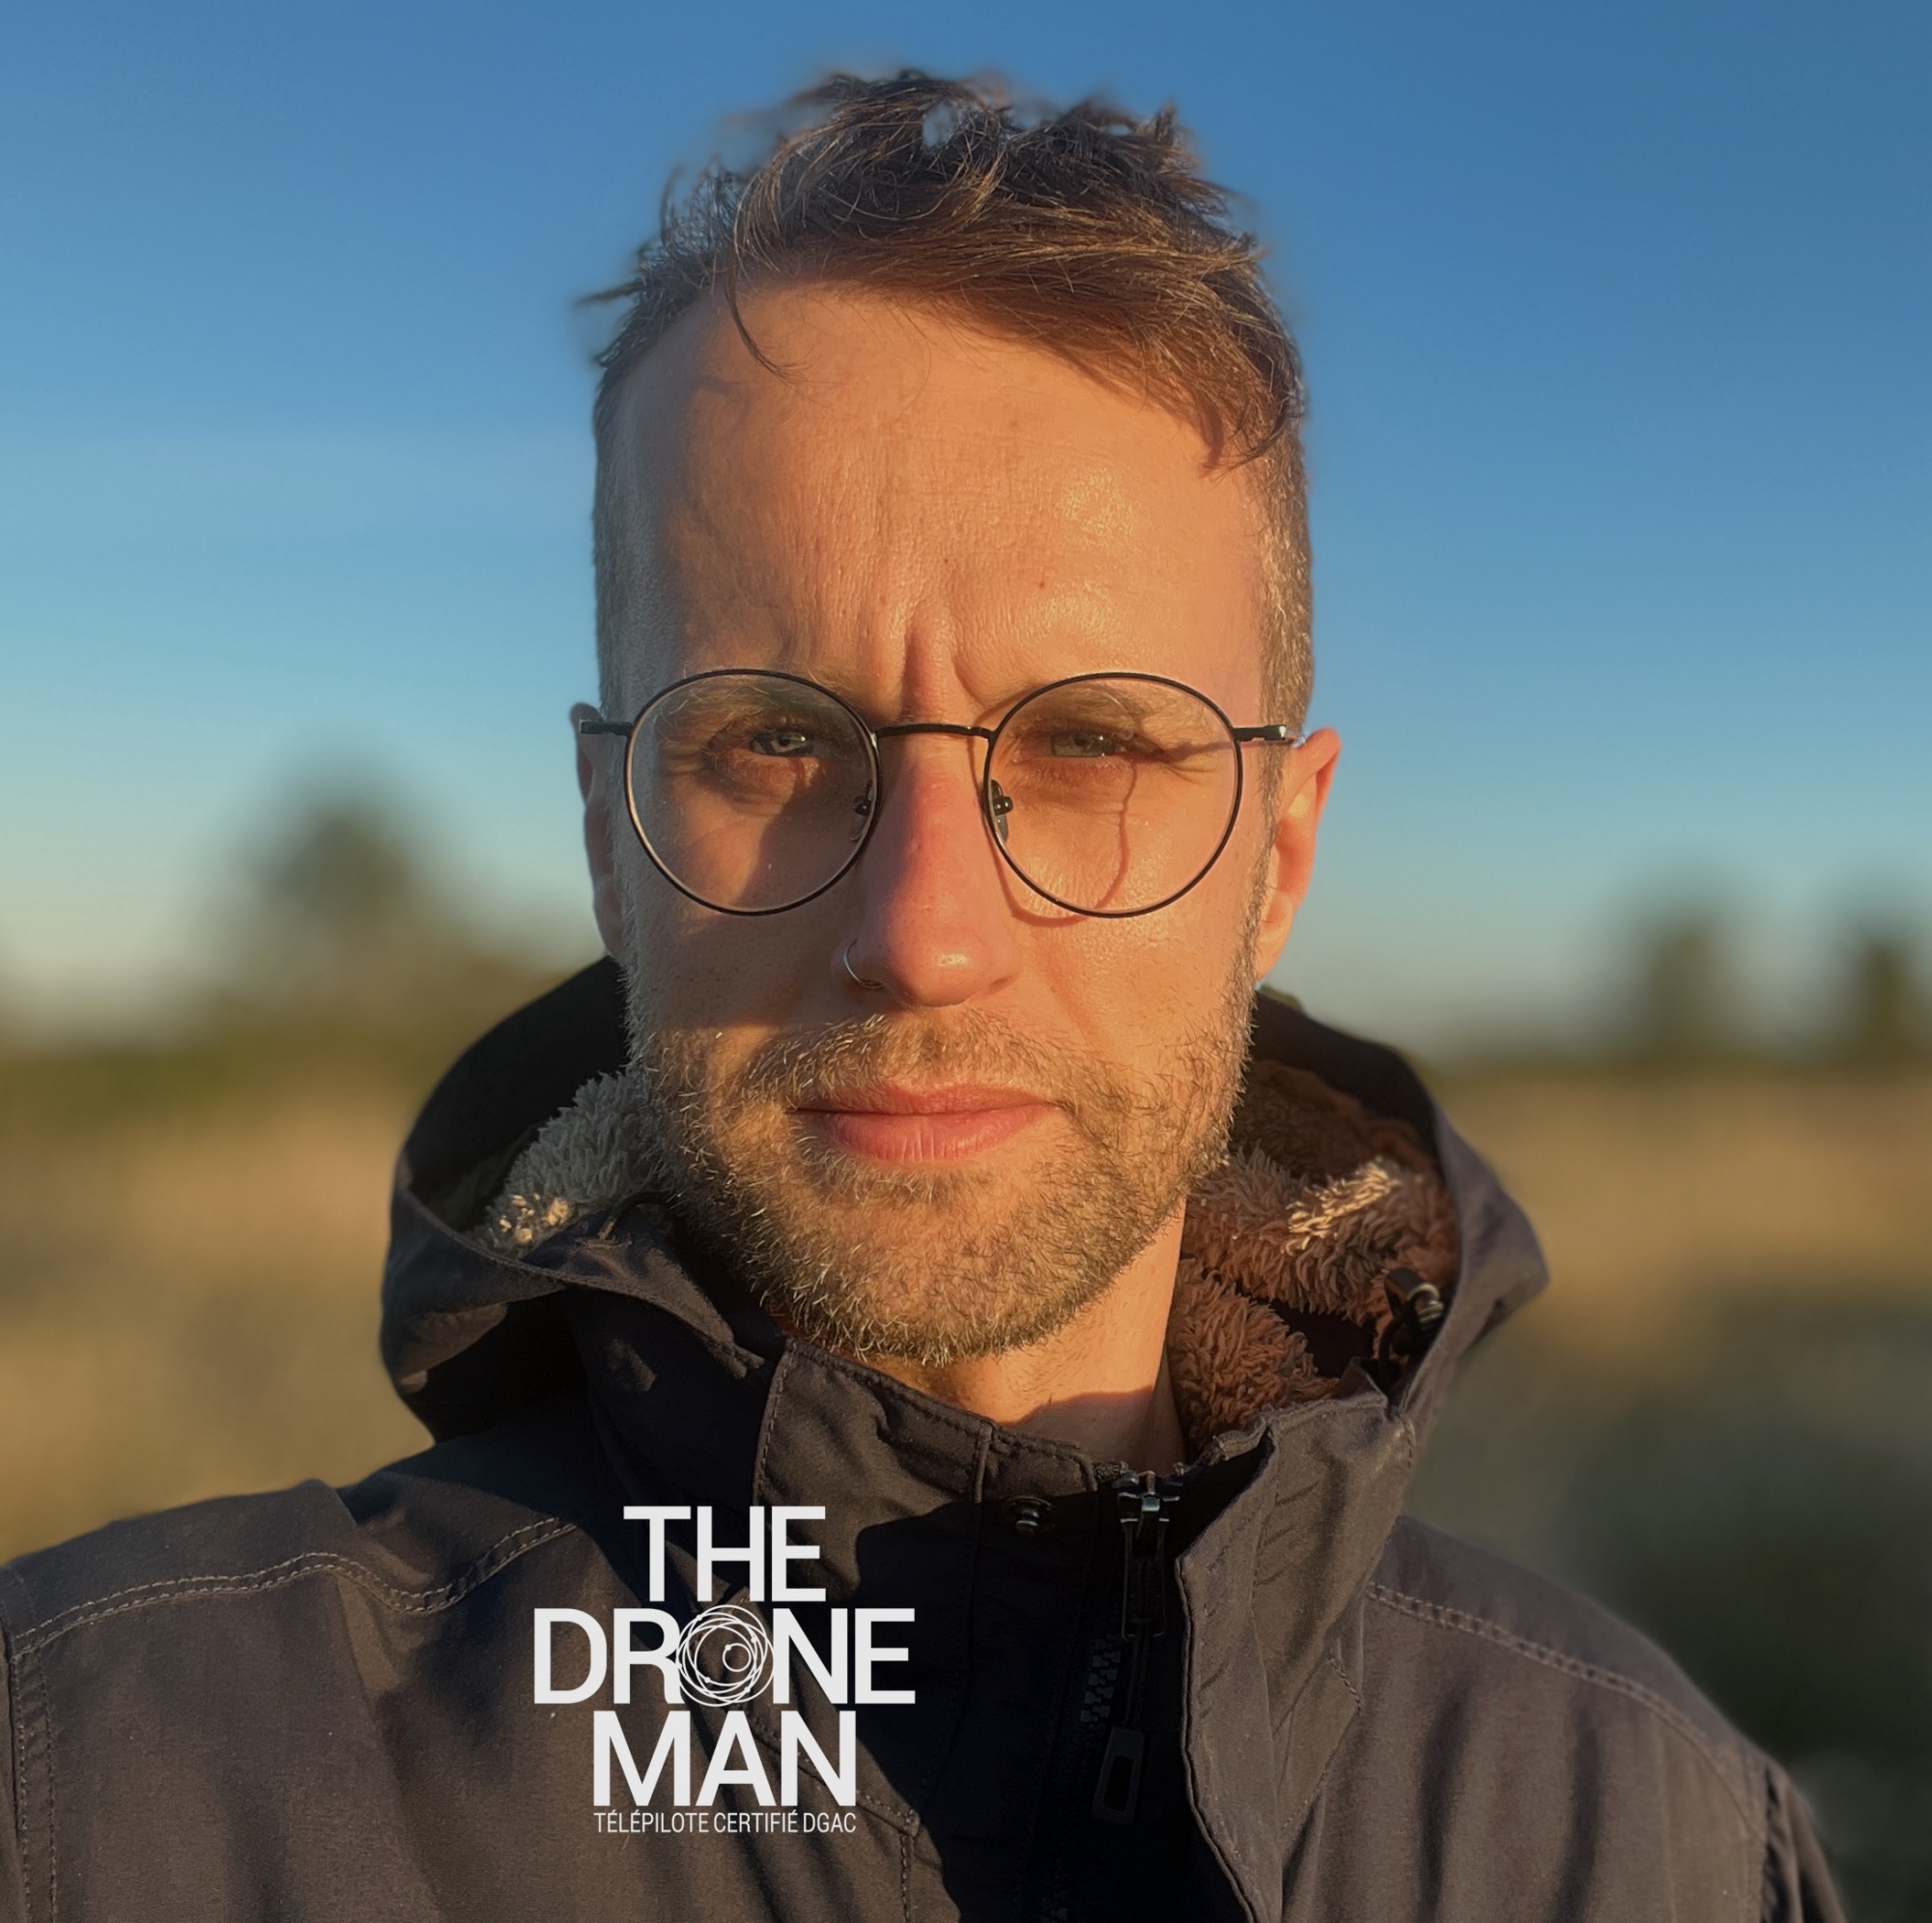 THE DRONE MAN